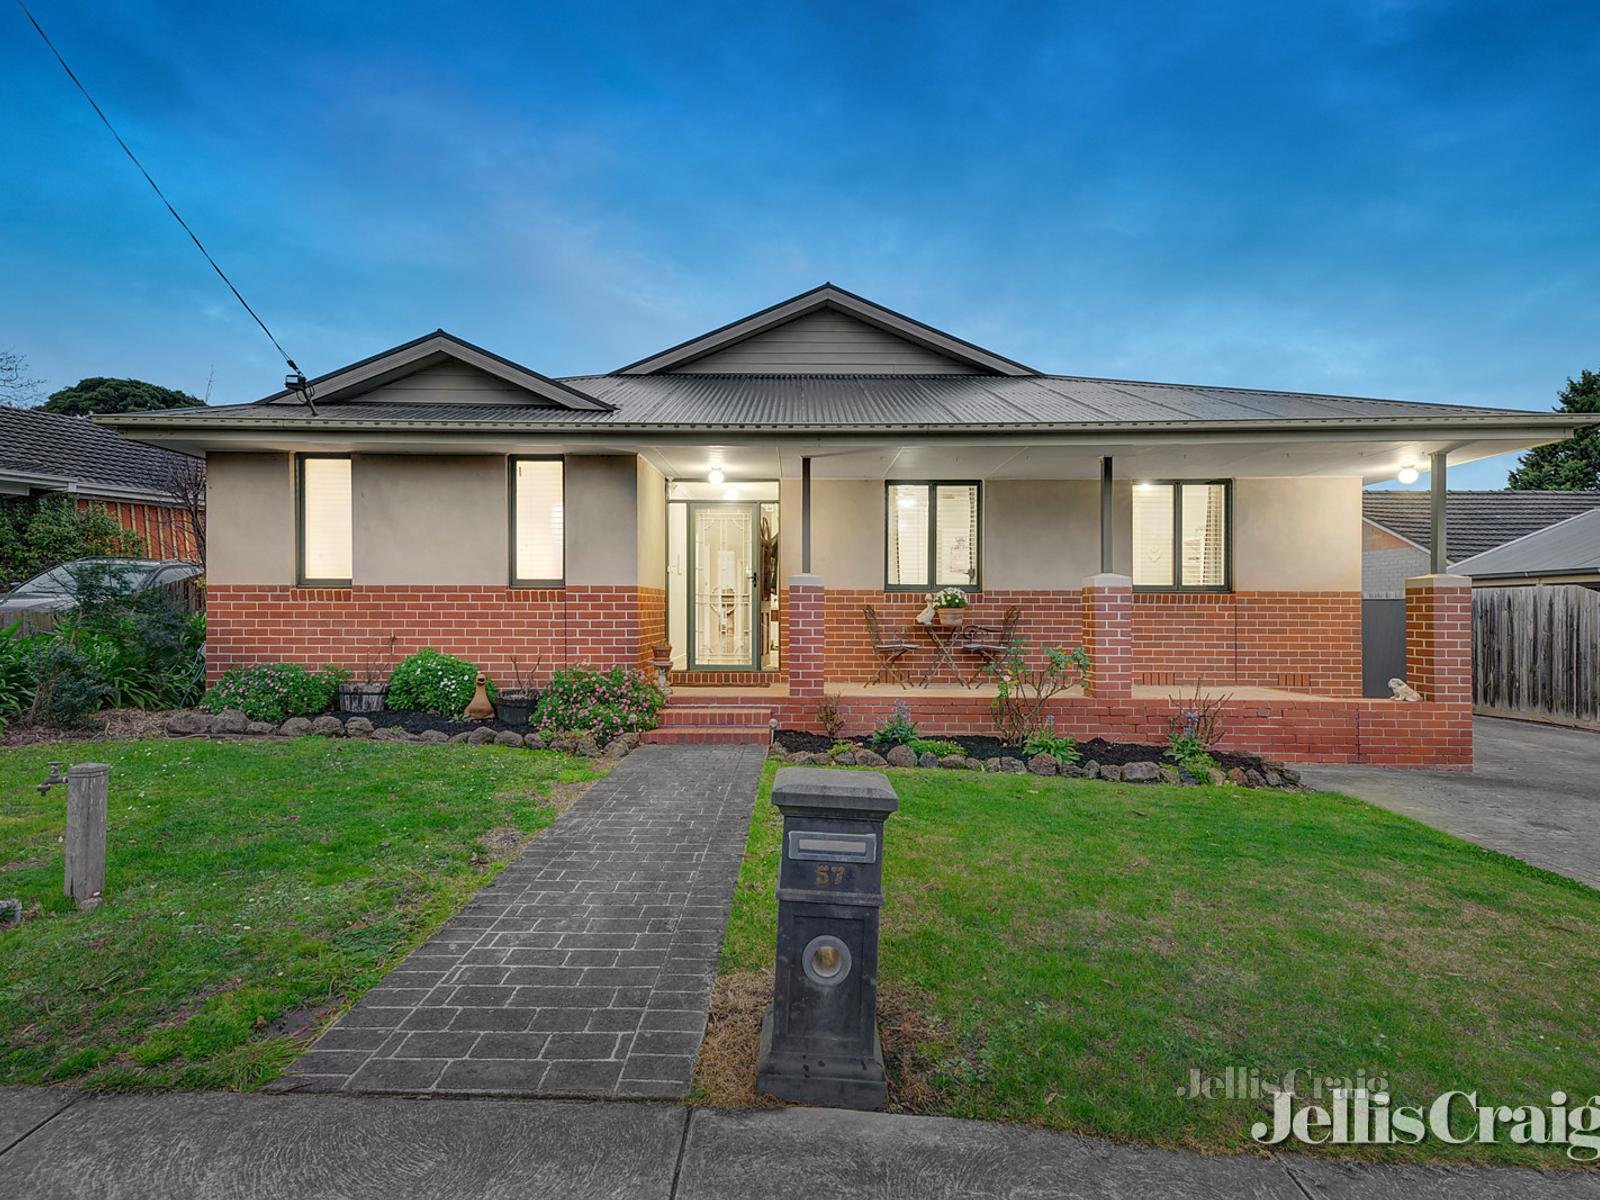 57 Armstrong Road, Heathmont - Print Image 1